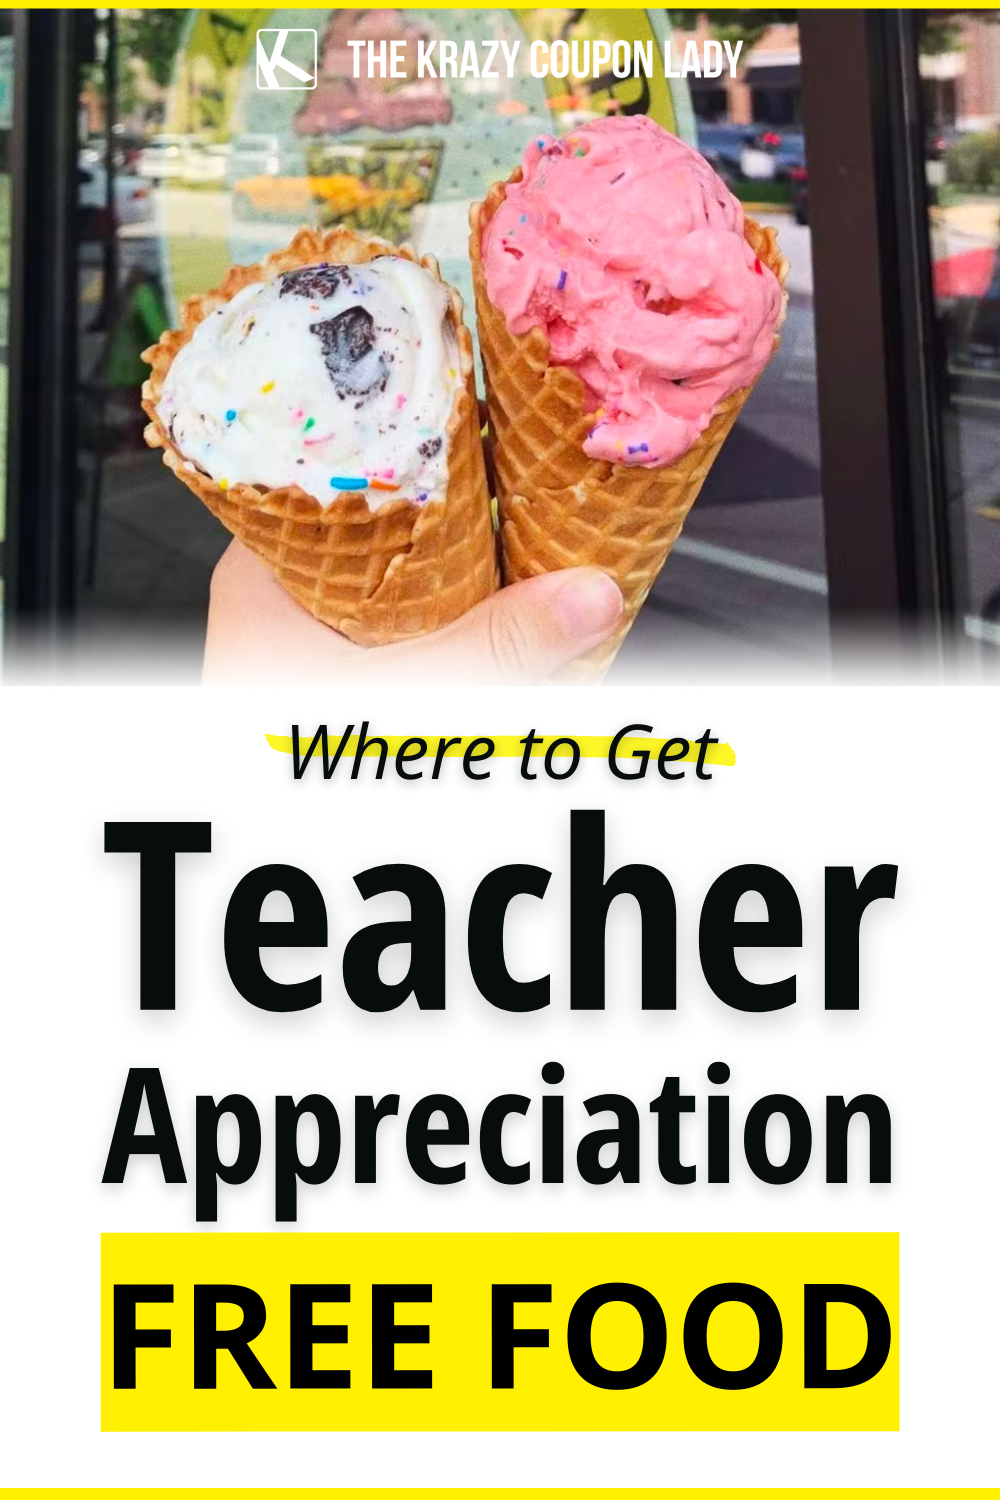 https://thekrazycouponlady.com/wp-content/uploads/2019/05/where-to-get-teacher-appreciation-week-free-food-deals-1651581794-1651581794.png